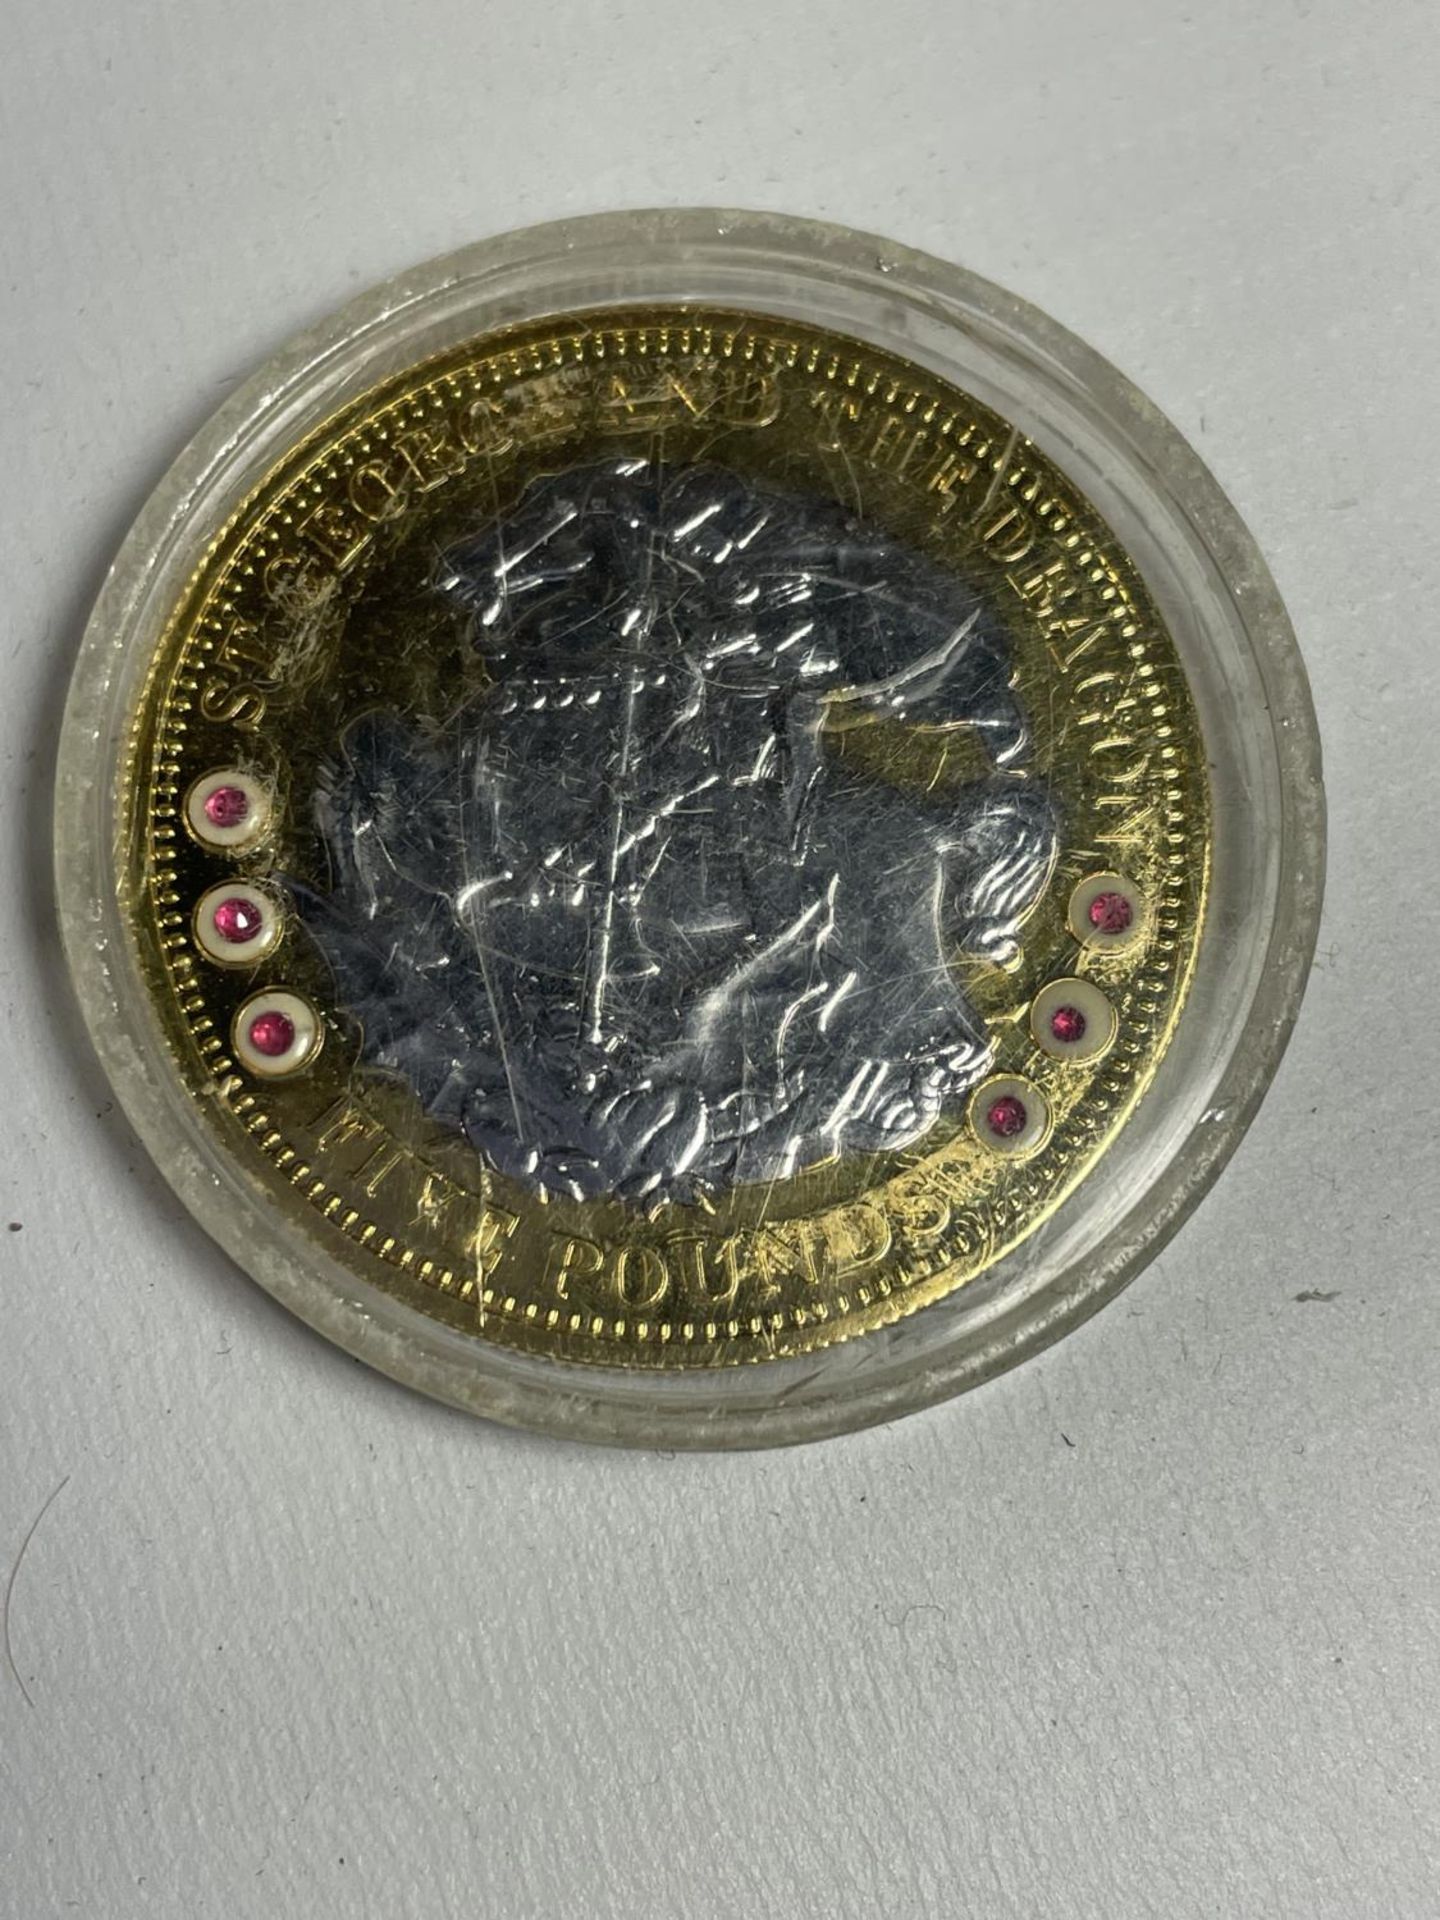 A SILVER GILT 2008 £5 COIN DEPICTING GEORGE AND THE DRAGON WITH RUBIES